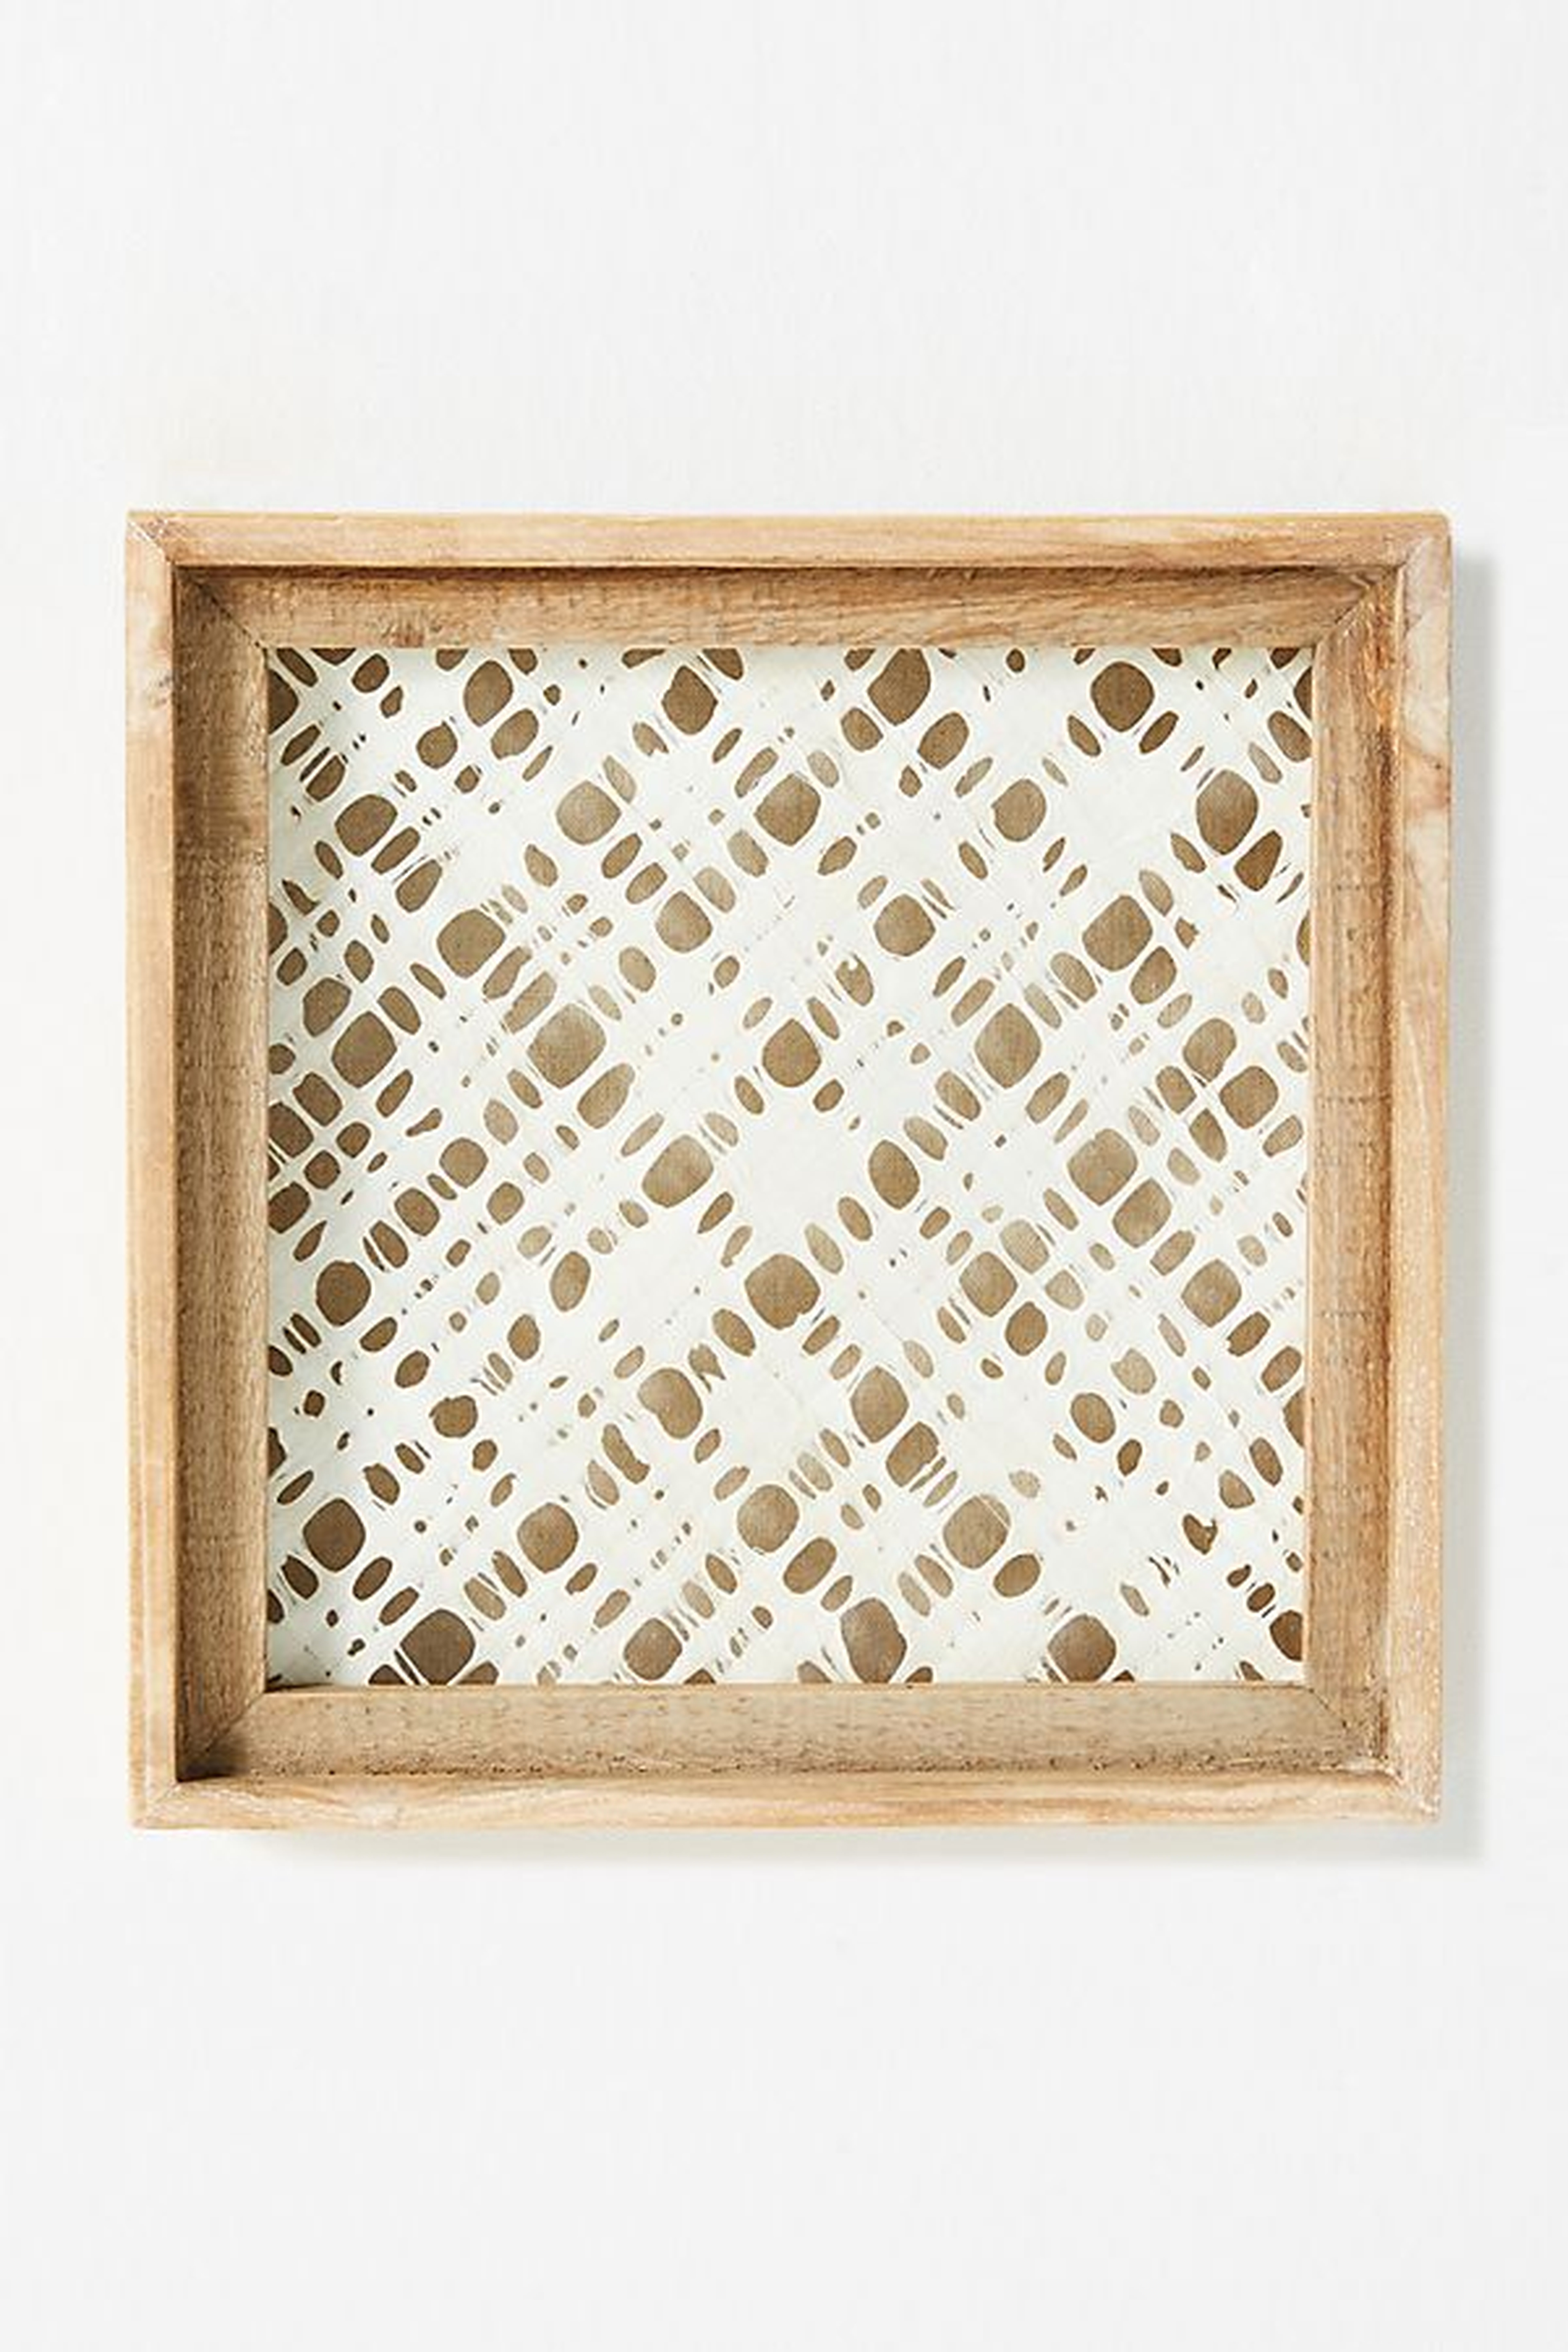 Paper and Wood Wall Art -Diamond - Anthropologie